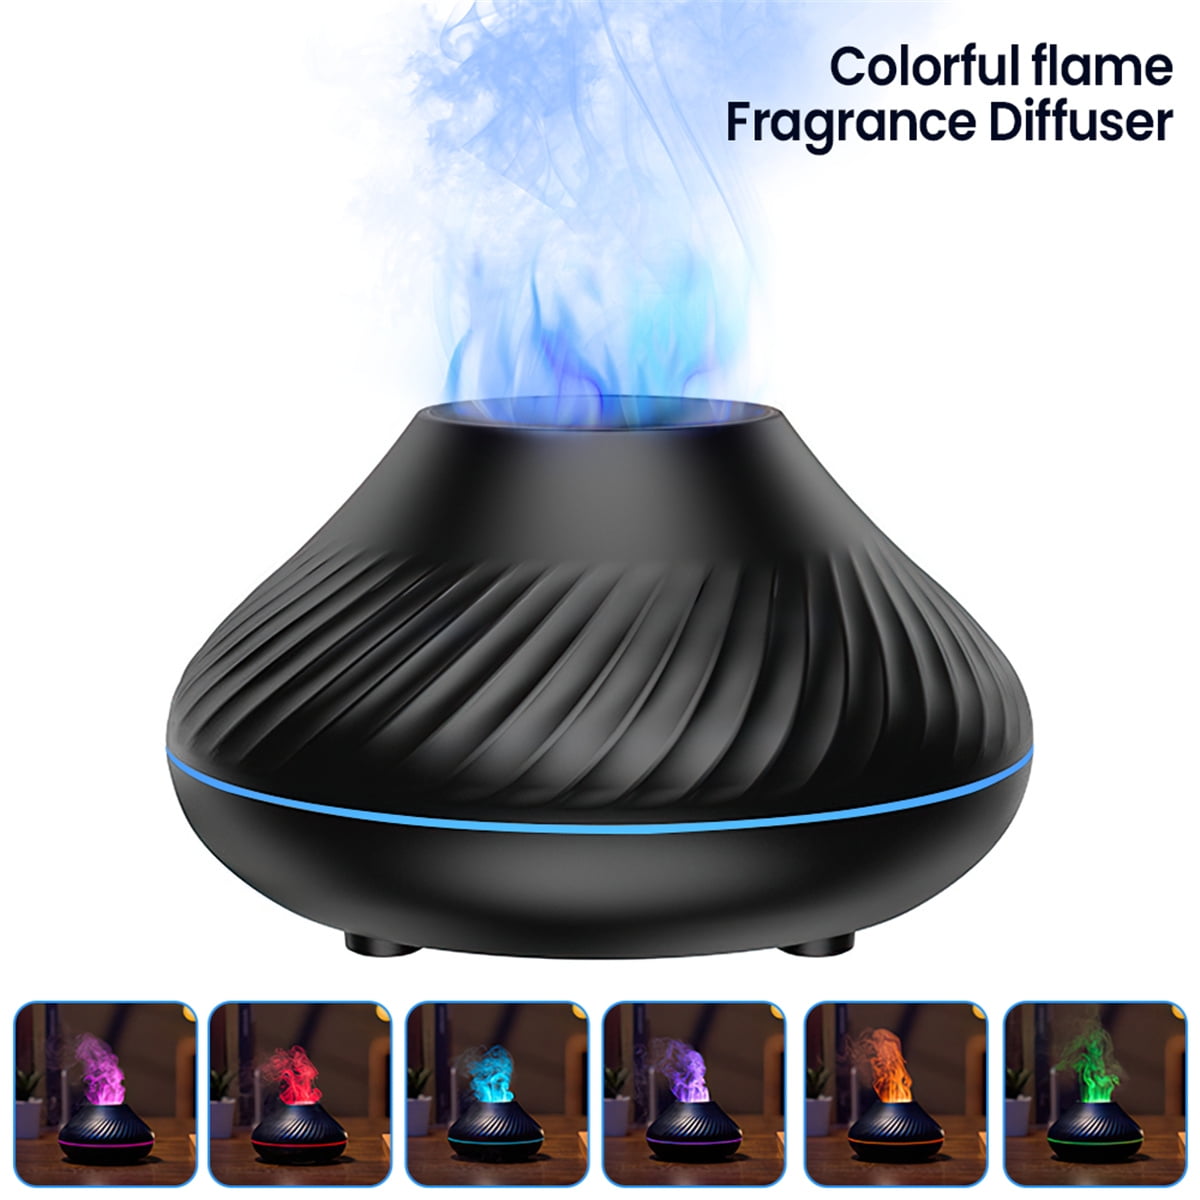 Essential Oil Diffuser with Flame Light, Ultrasonic Super Quiet Diffuser  for Aromatherapy Essential Oils Mist Humidifiers with 7 Flame Color, Auto-Off  Protection Oil Diffusers for home Office 